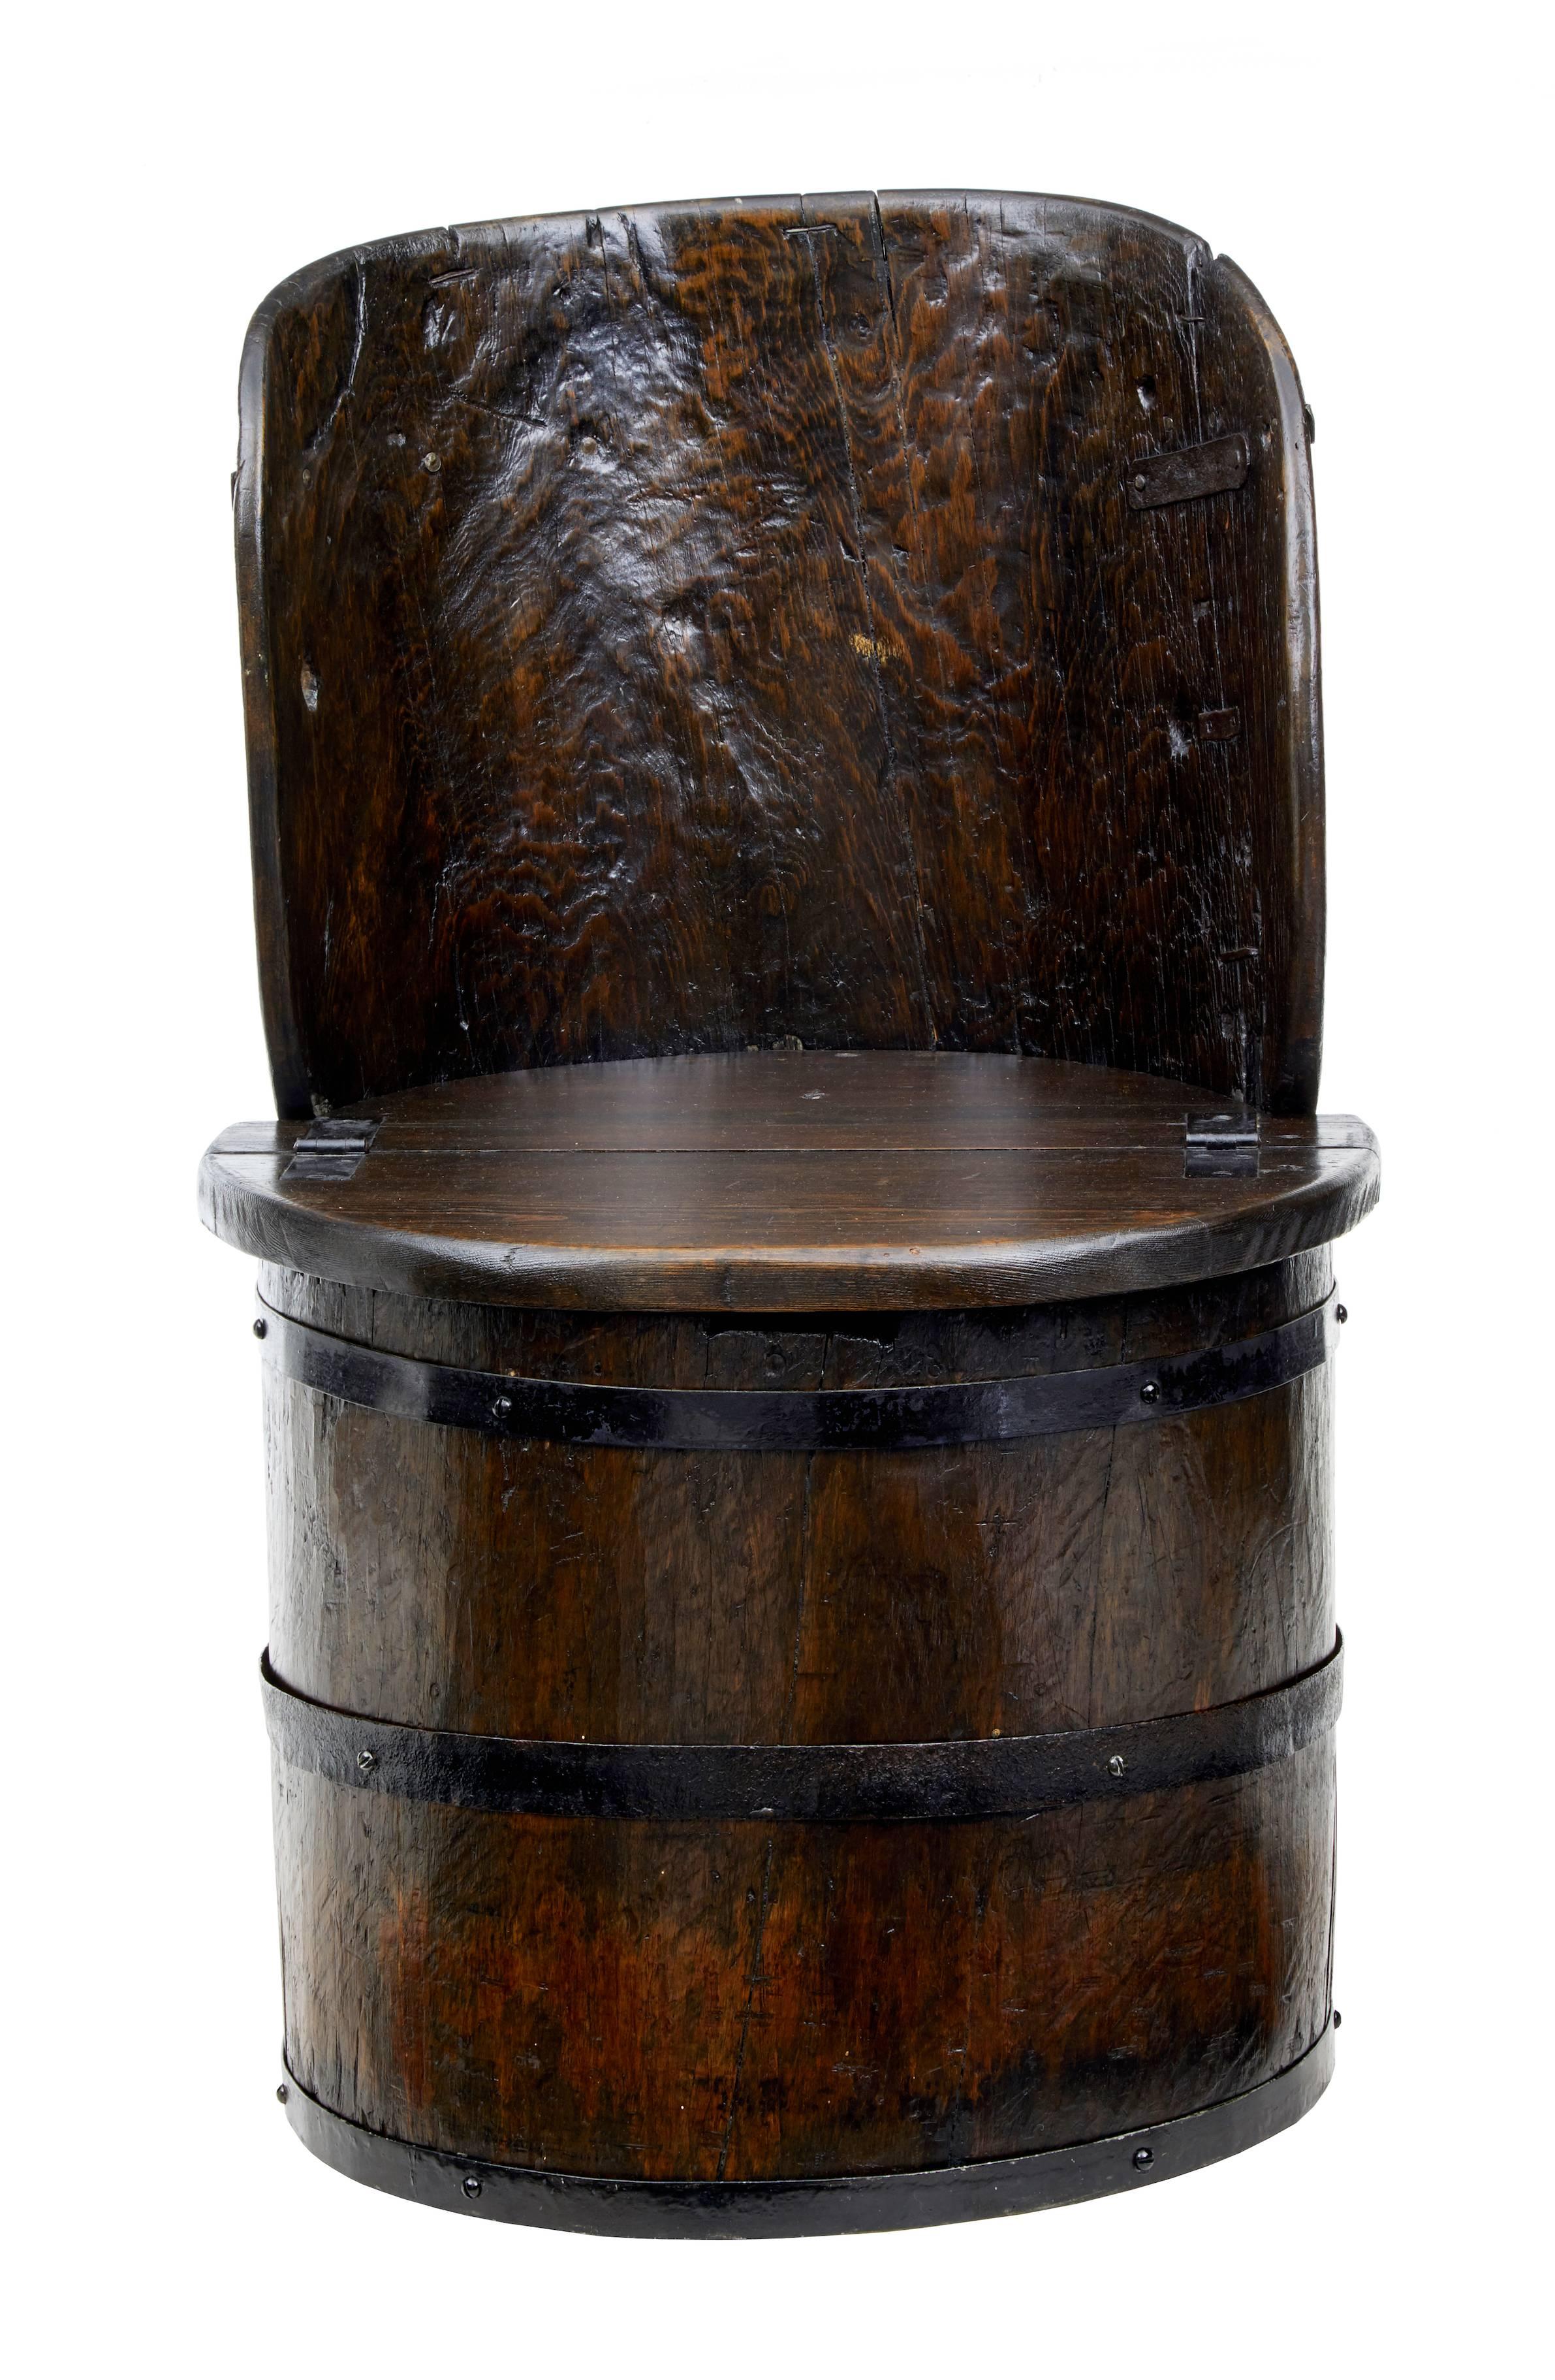 English country oak barrel chair, circa 1890.
Made from an earlier coopered barrel with lift up lid.
Good dark oak color and patina.
Recently restored for strength and stability.
Please note there is no bottom to the base.

Measures: Height 32